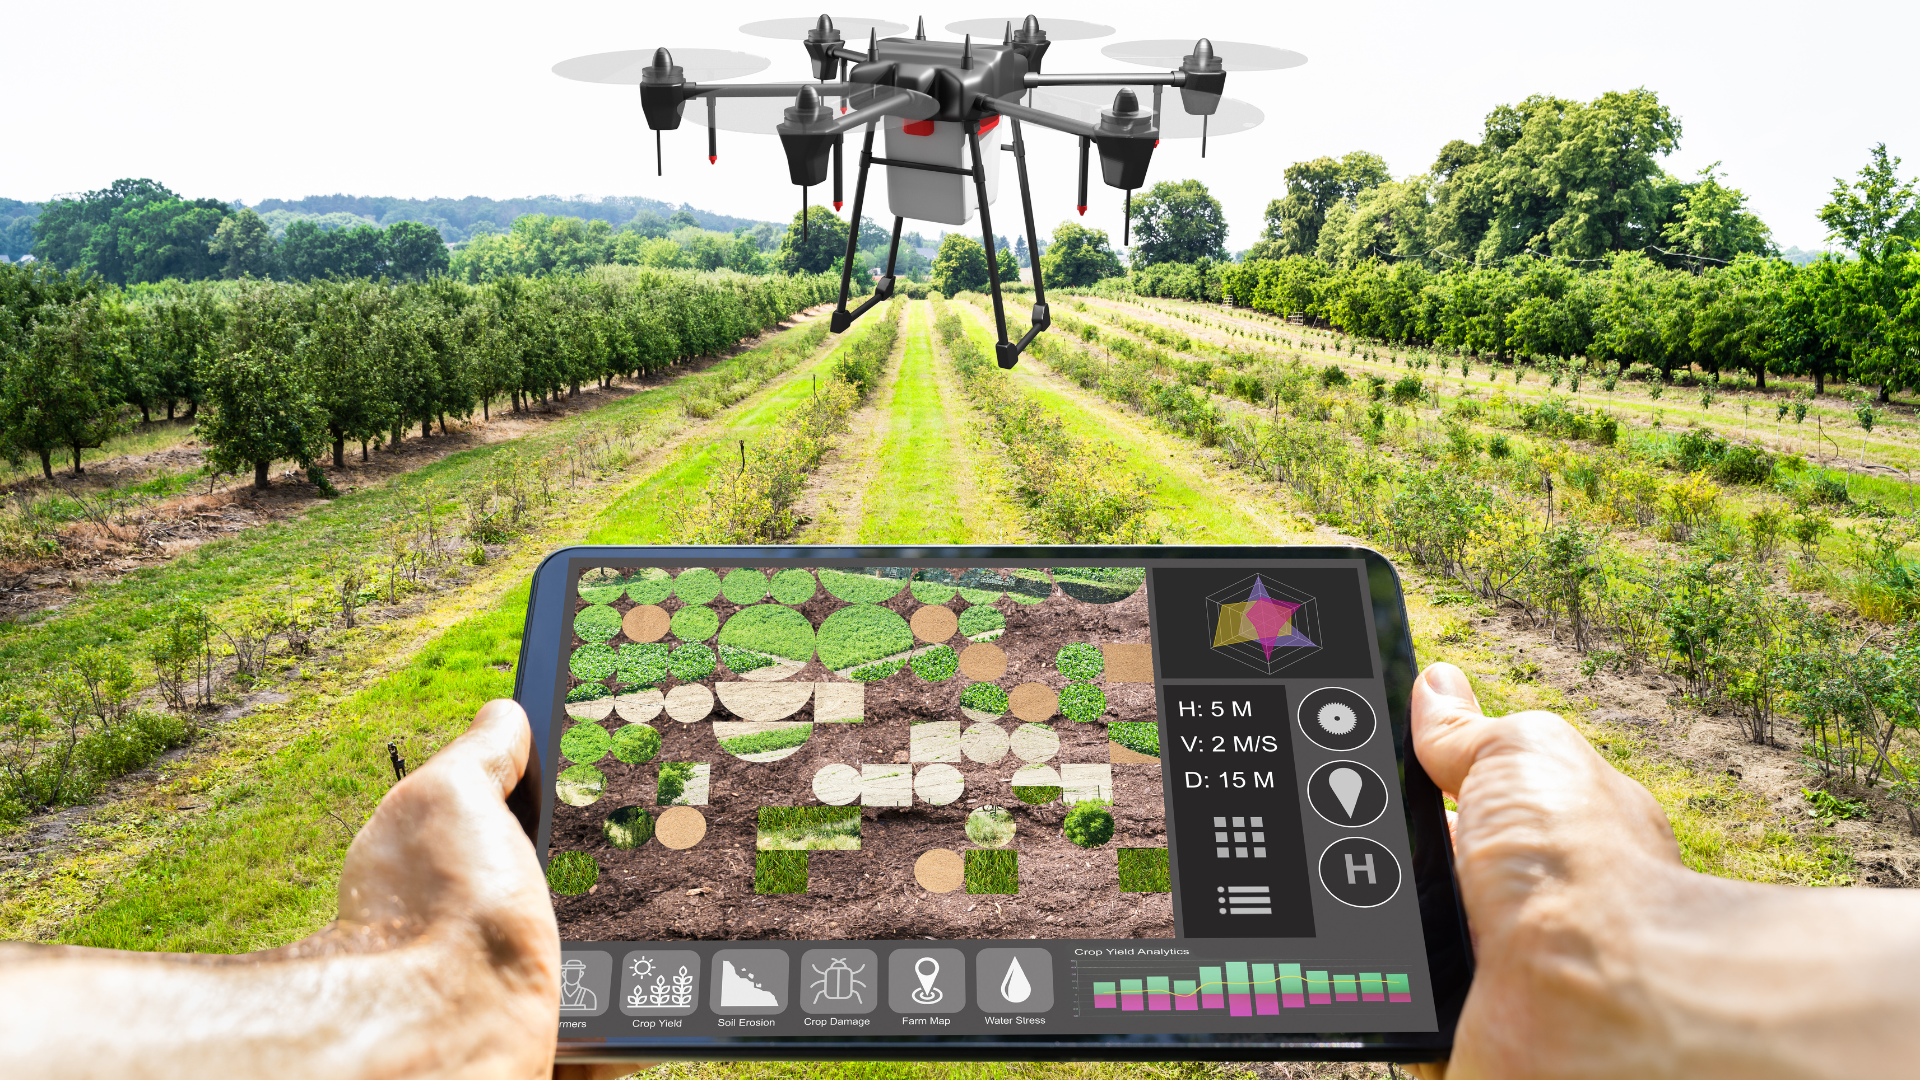 IoT applications for Smart Agriculture